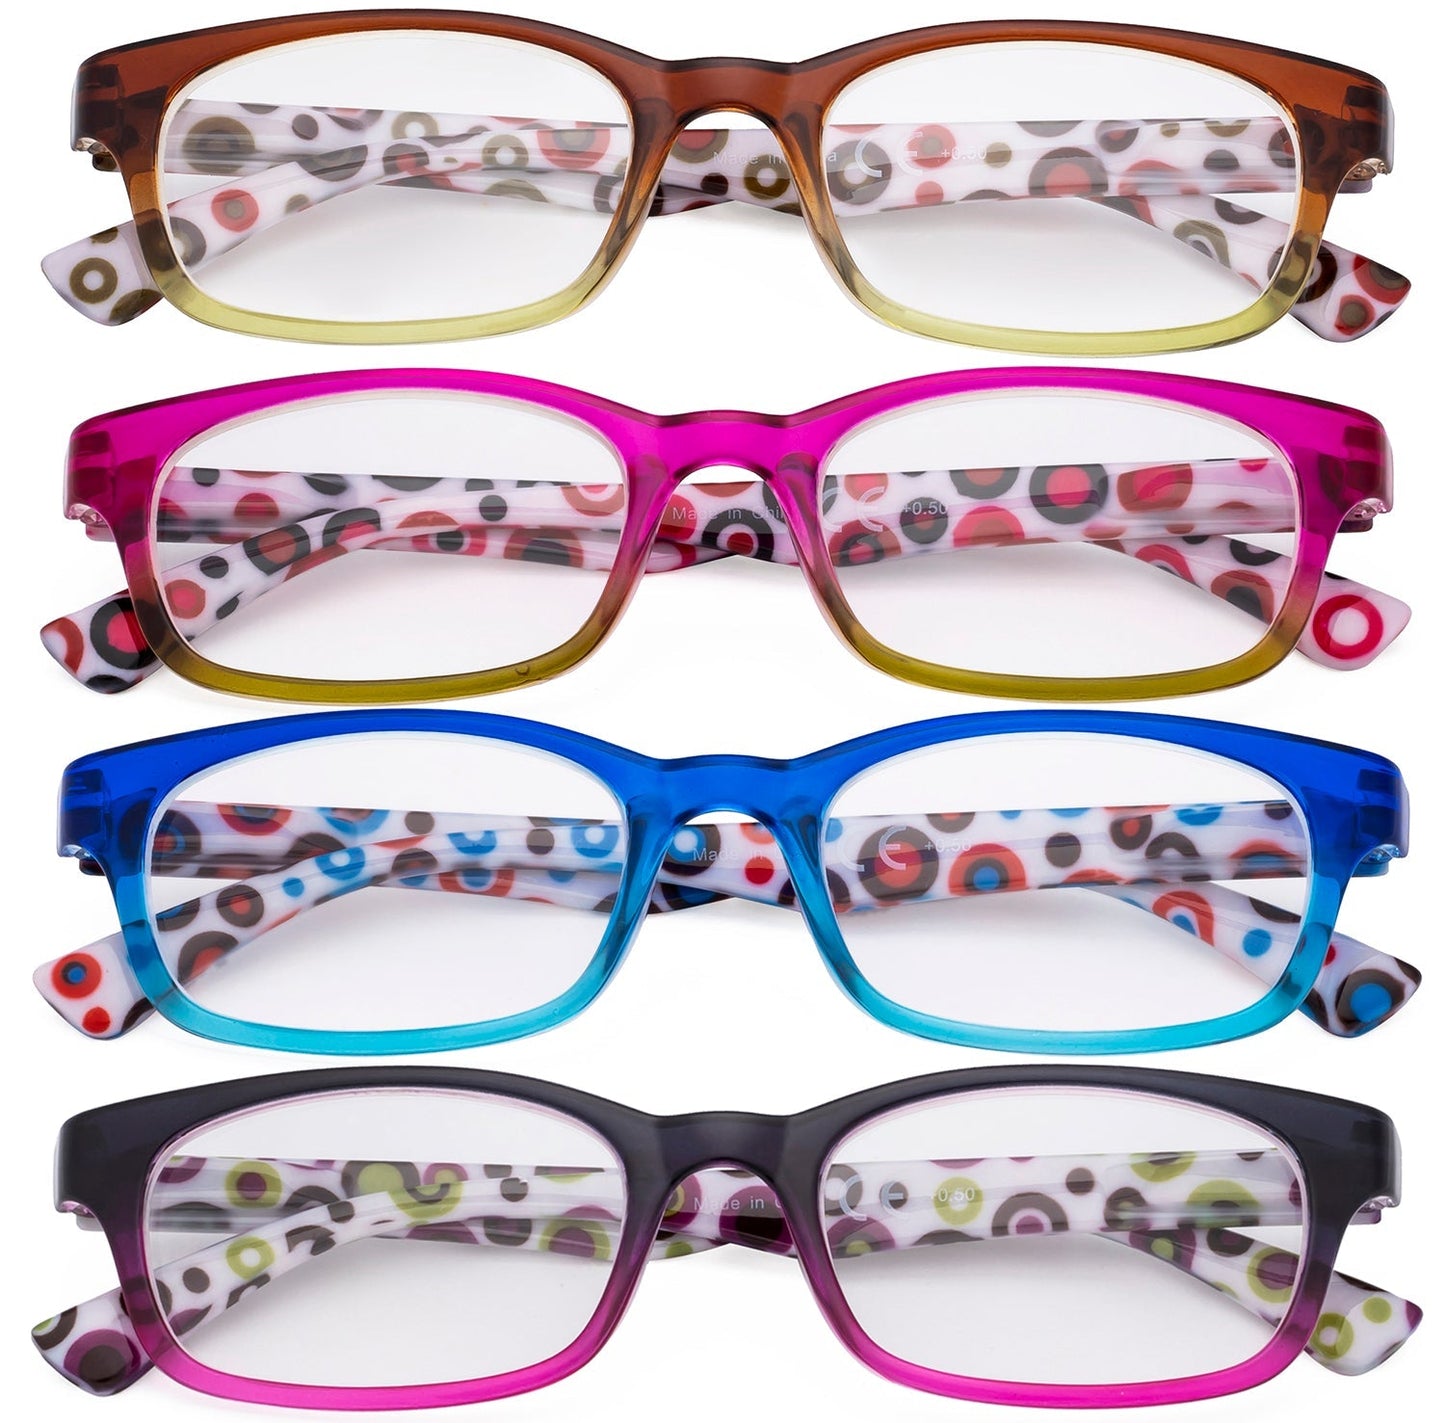 4 Pack Fashion Polka Dots Patterned Reading Glasses R029P